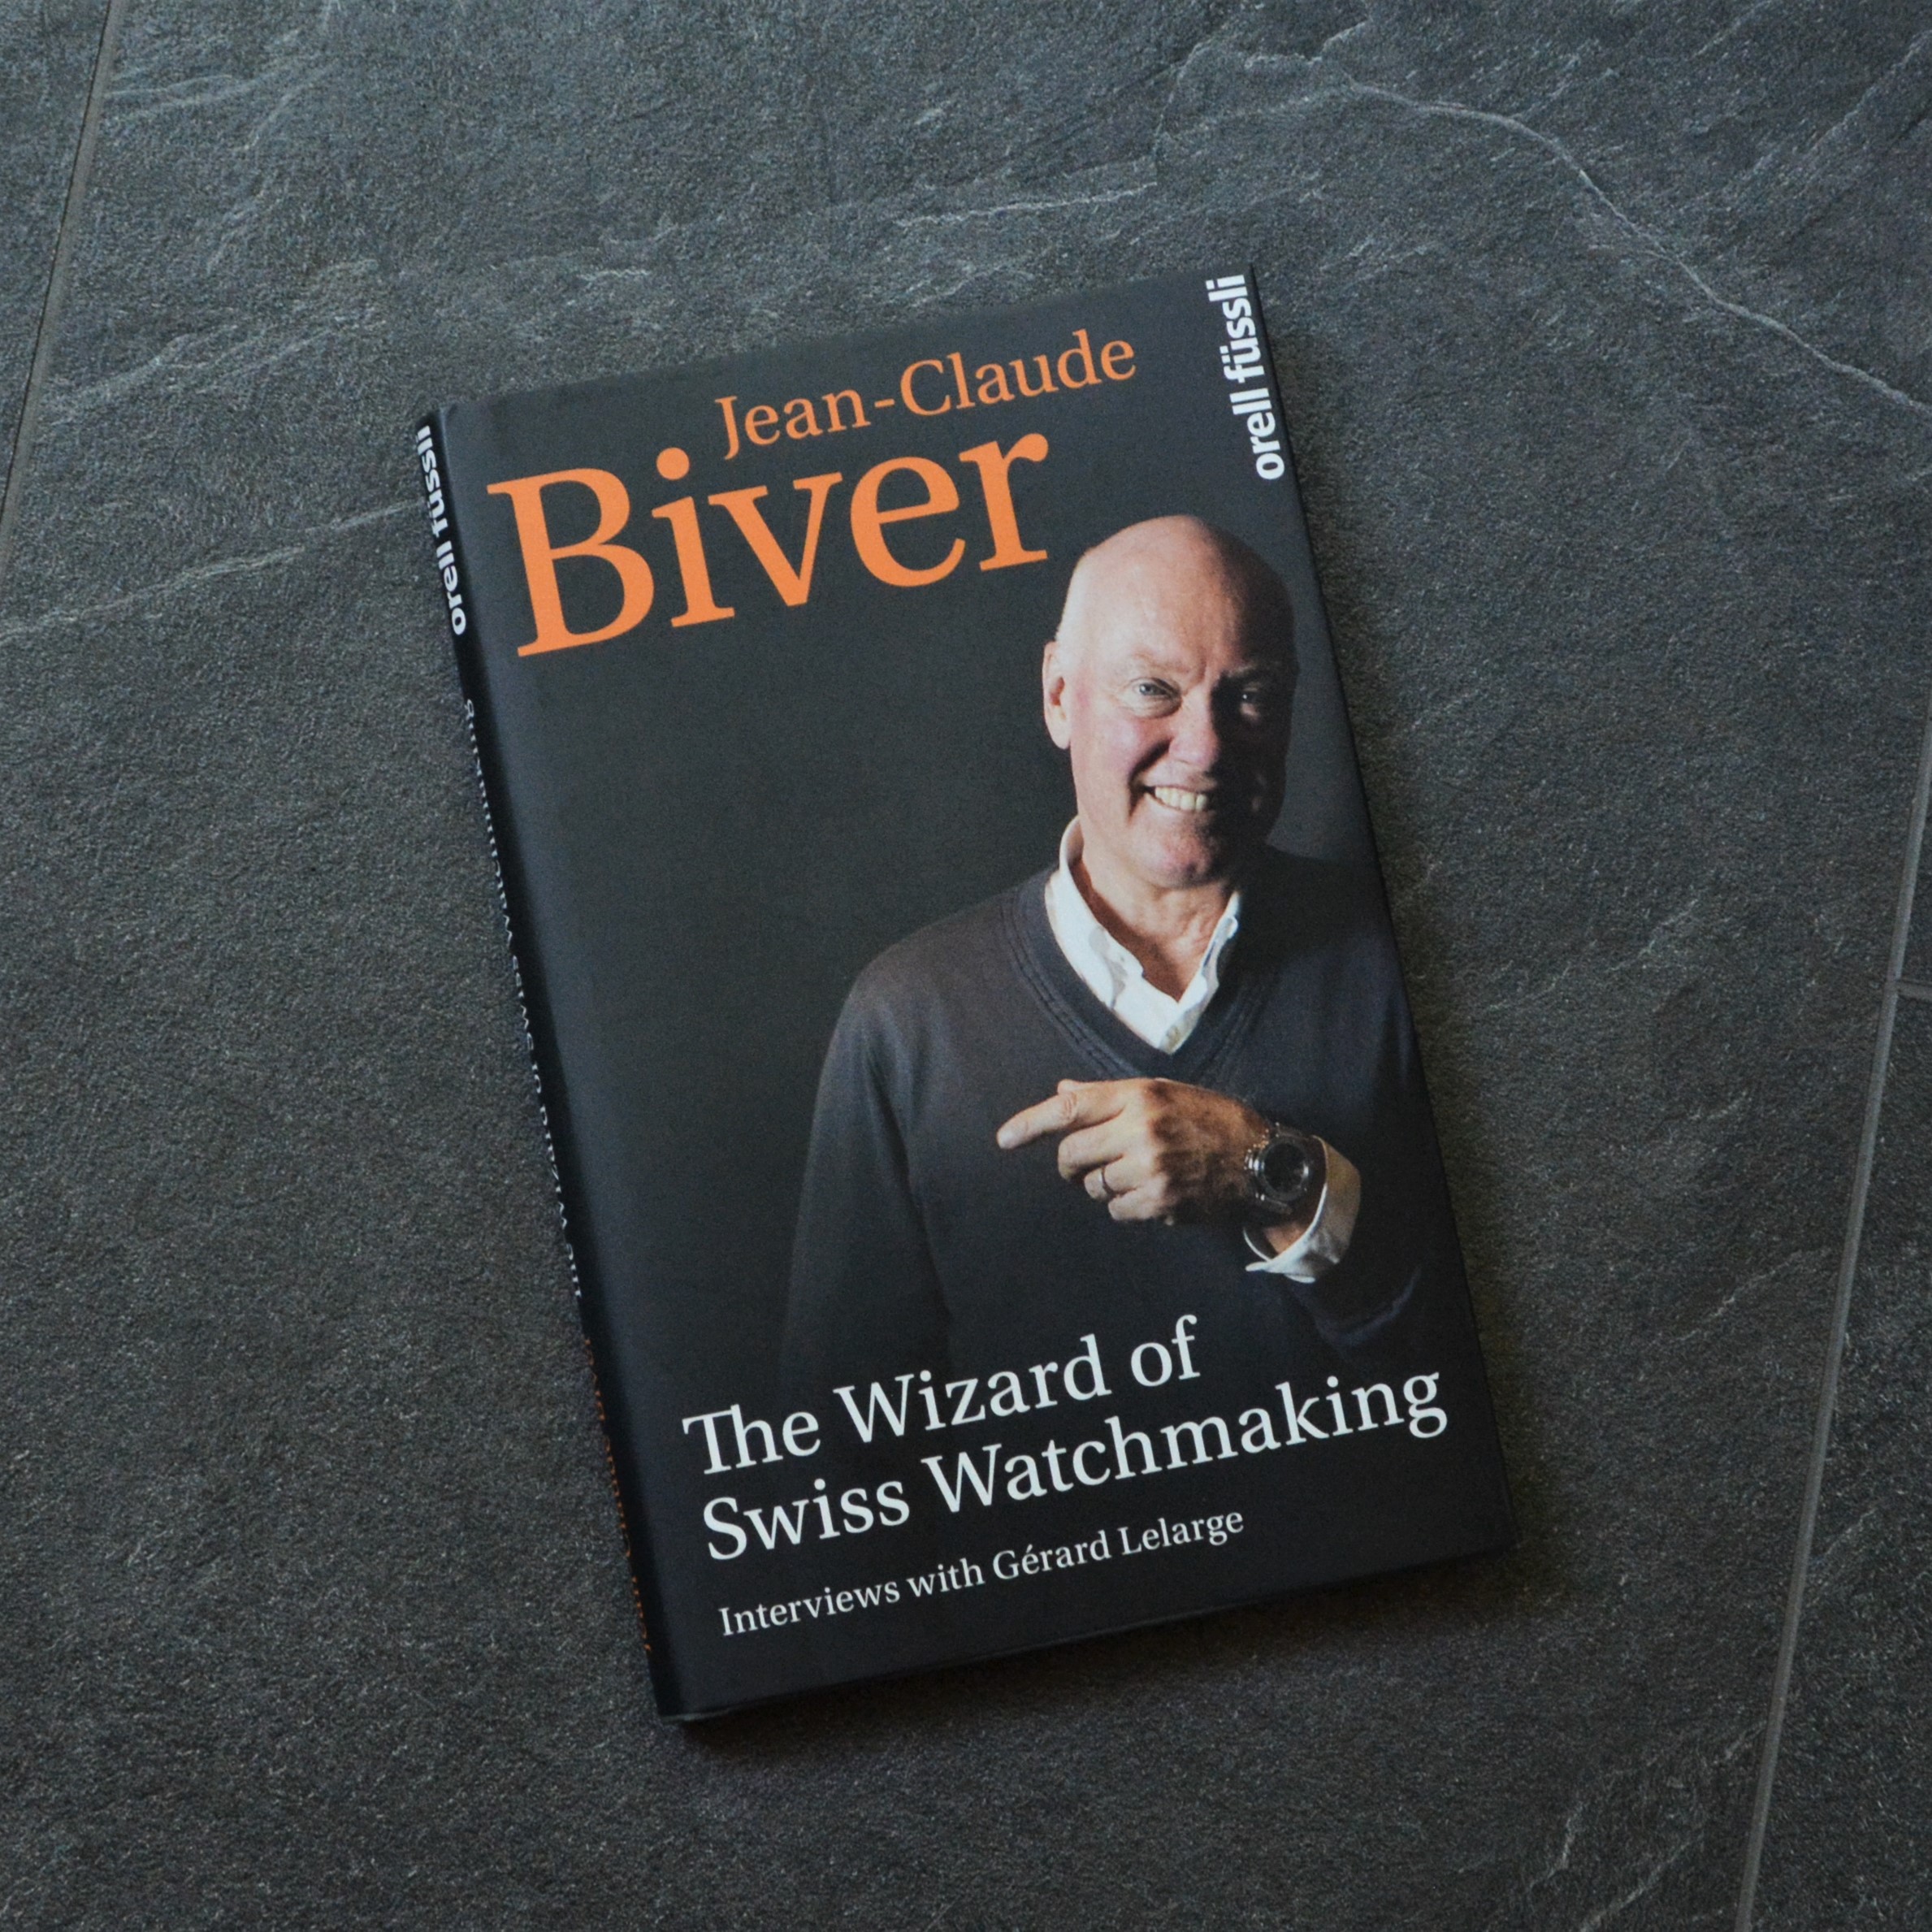 The Wizard of Swiss Watchmaking - Interviews with Jean-Claude Biver